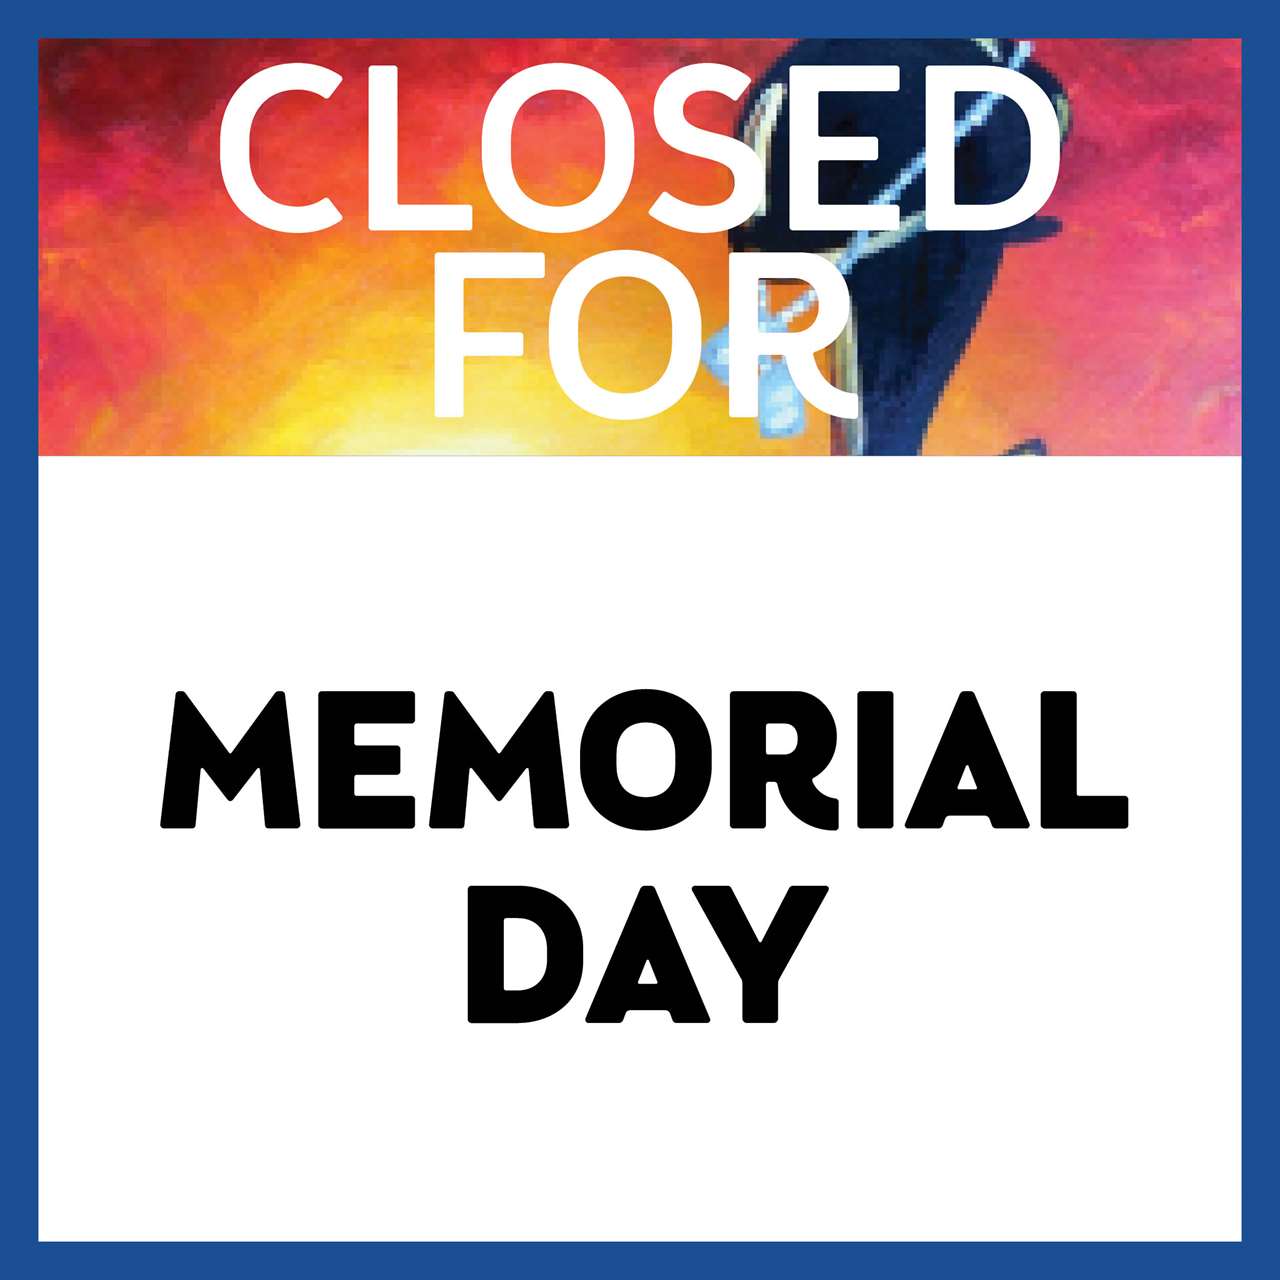 closed-for-memorial-day-mon-may-25-12am-at-livermore